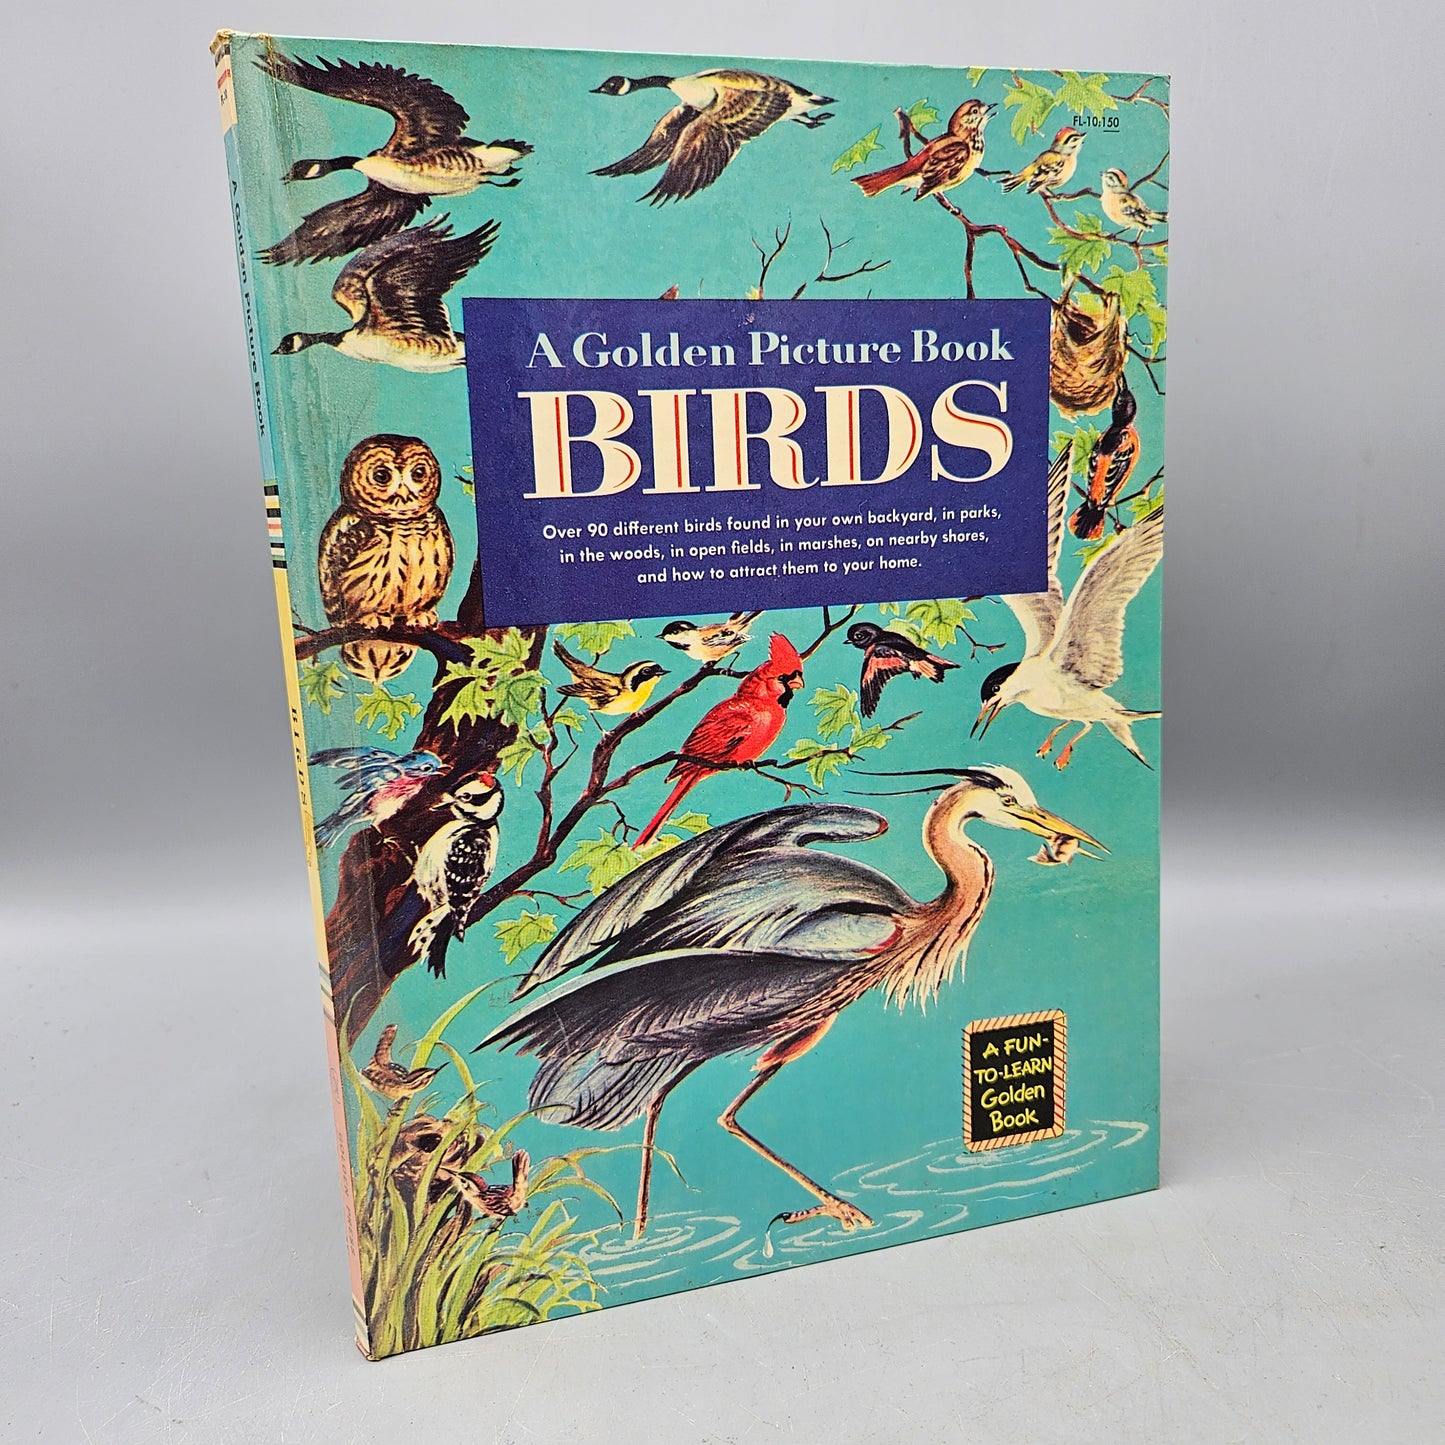 Book: A Golden Picture Book: Birds by Clara Hussong and Marjorie Hartwell (1959)